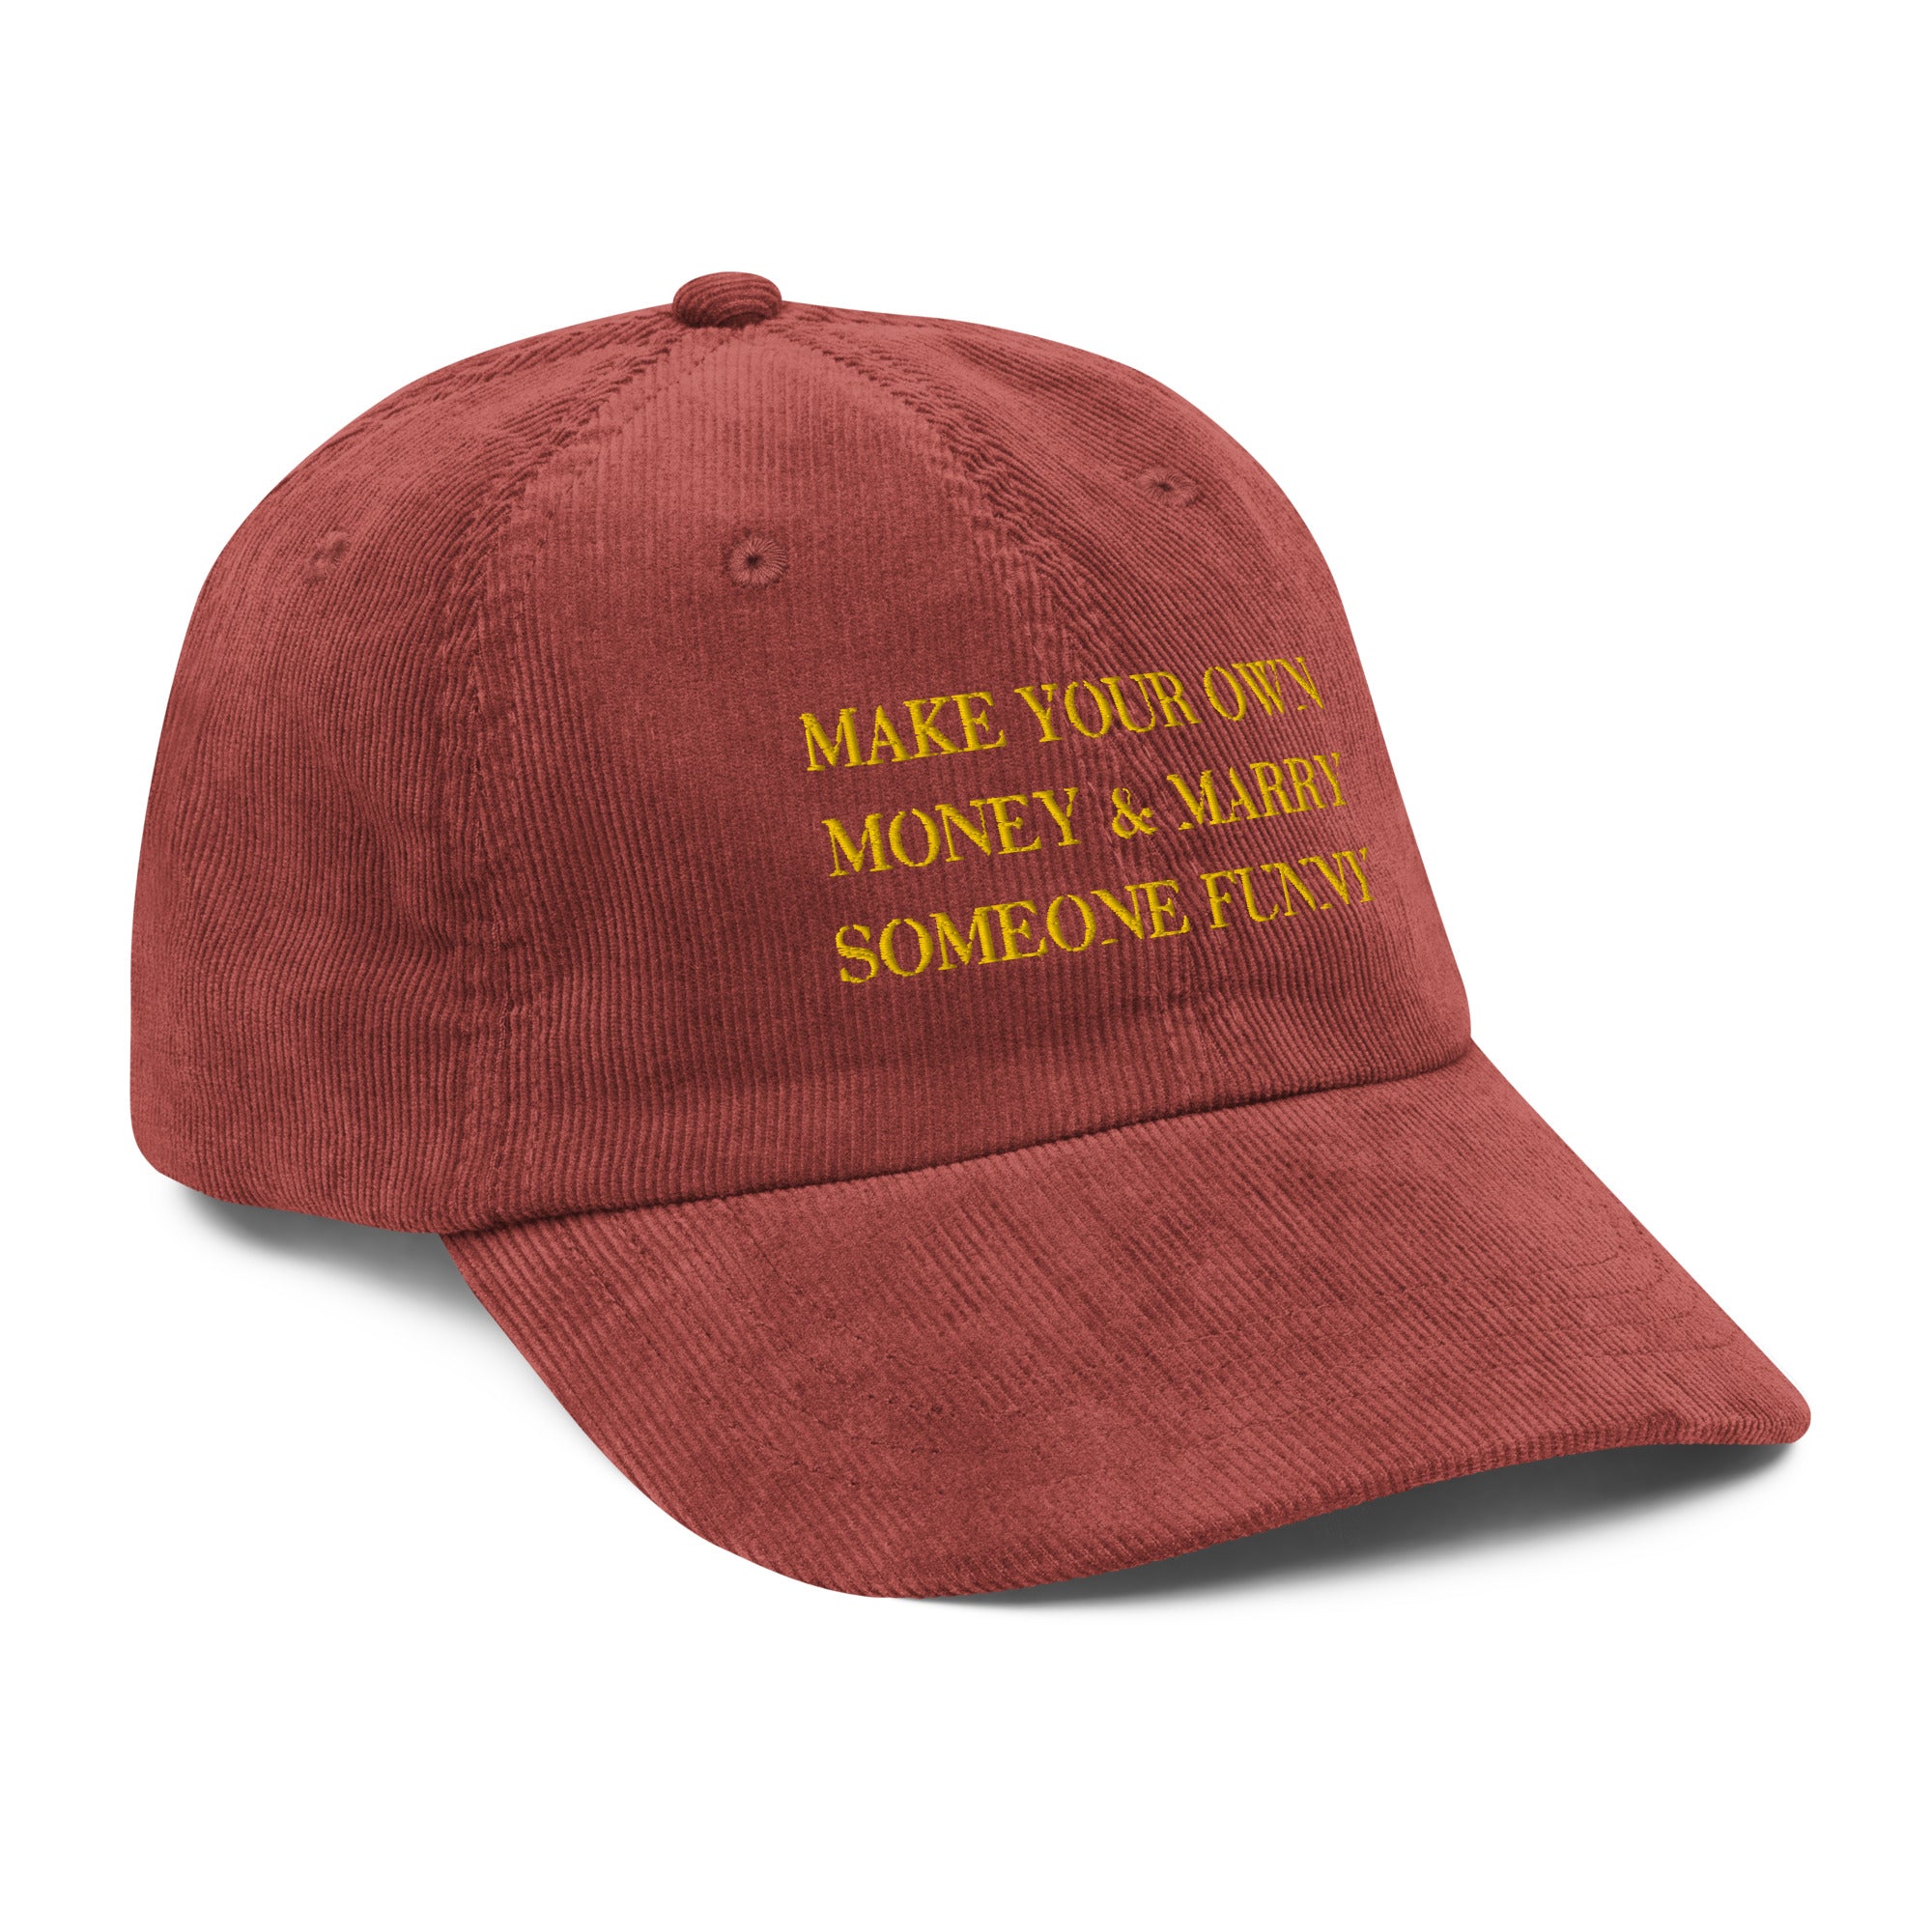 House Rules Hat